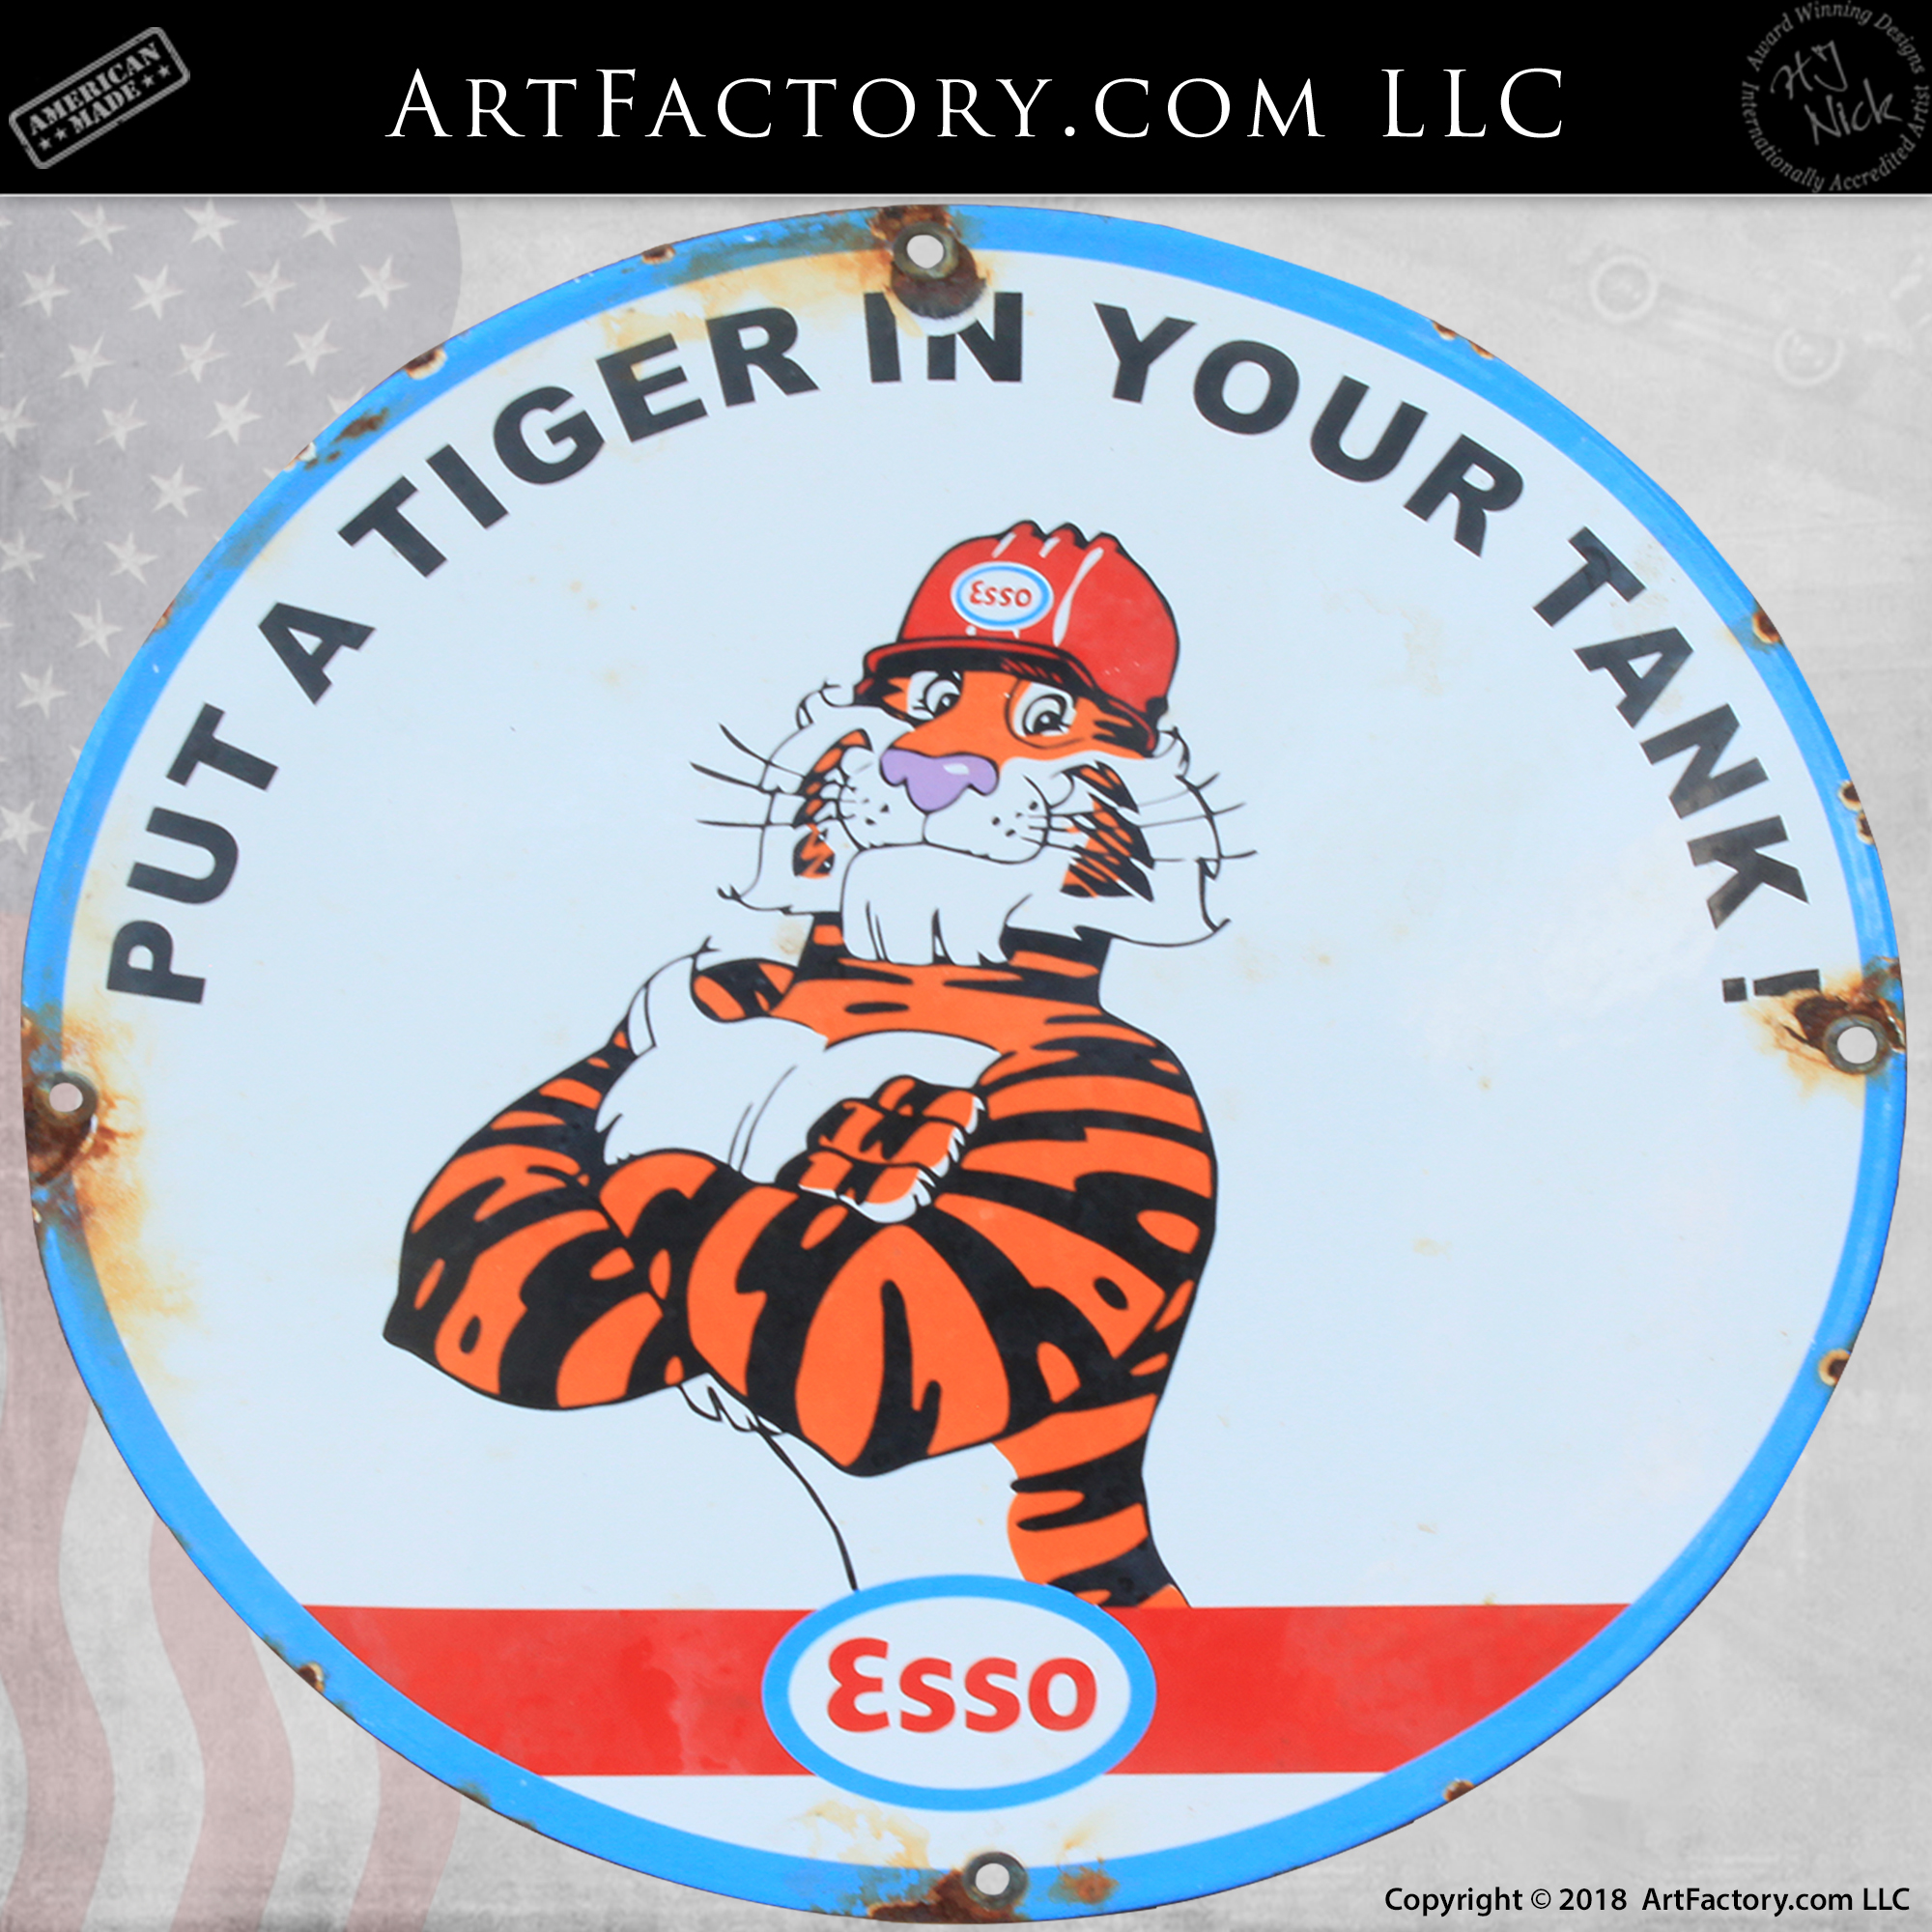 Esso Put A Tiger In Your Tank!